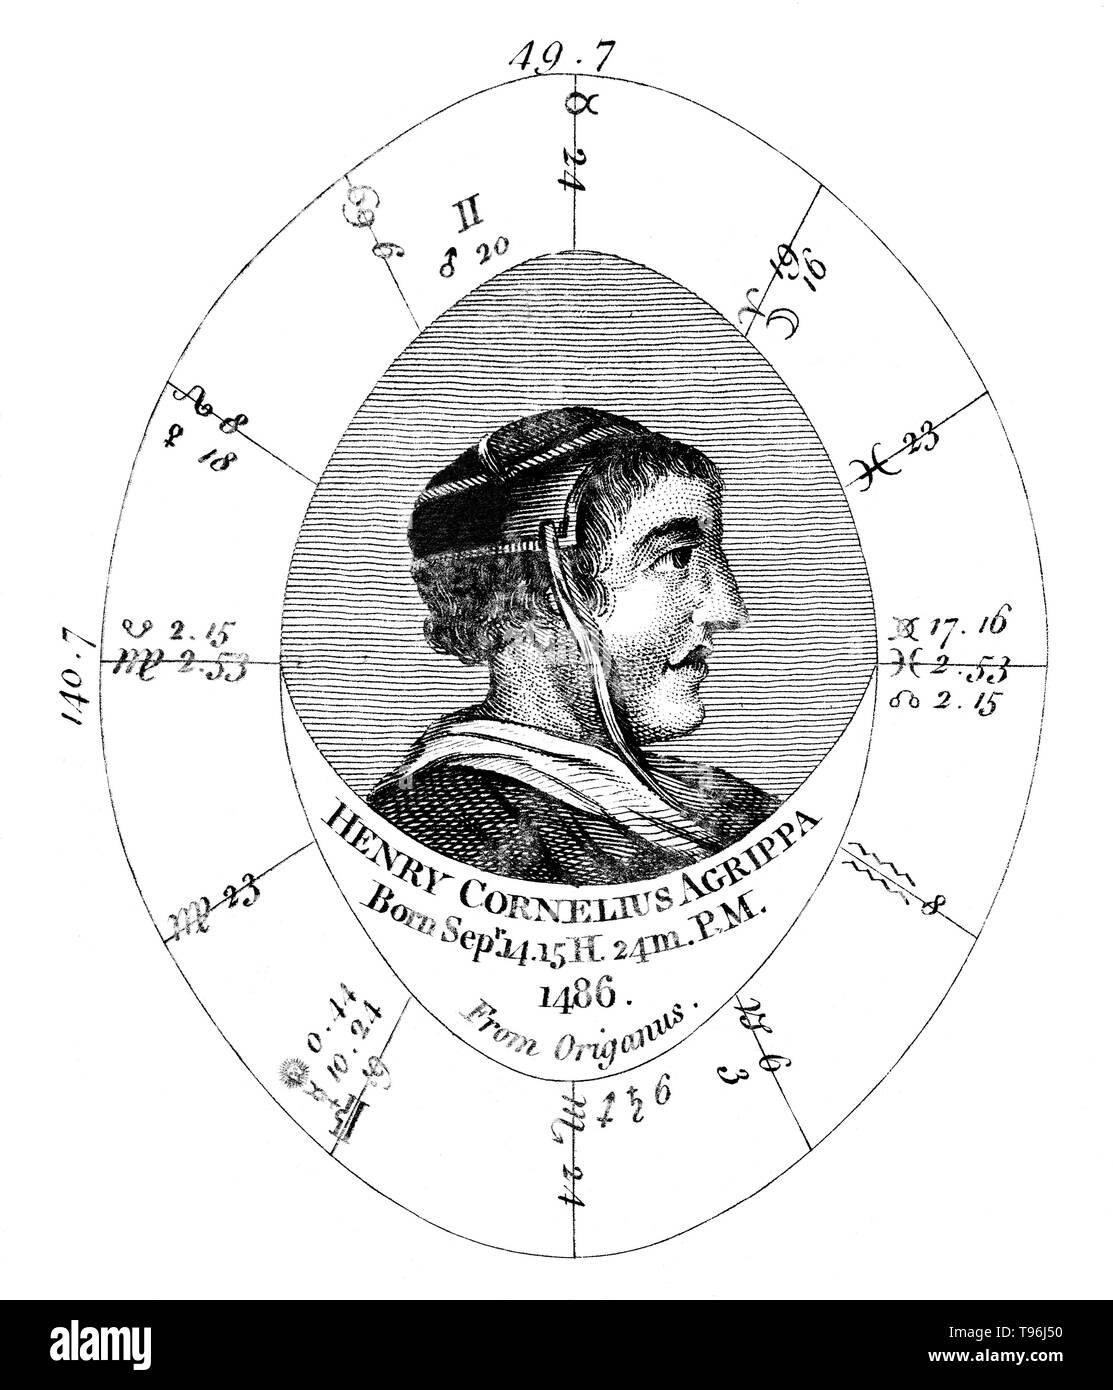 Astrological birth chart for Heinrich Cornelius Agrippa by Ebenezer Sibly, undated. Heinrich Cornelius Agrippa von Nettesheim (September 14, 1486 - February 18, 1535) was a German magician, occult writer, theologian, astrologer and alchemist. In 1510, he studied briefly with Johannes Trithemius, and Agrippa sent him an early draft of his masterpiece, De occulta philosophia libri tres; a study of elemental, celestial, and intellectual magic. Stock Photo